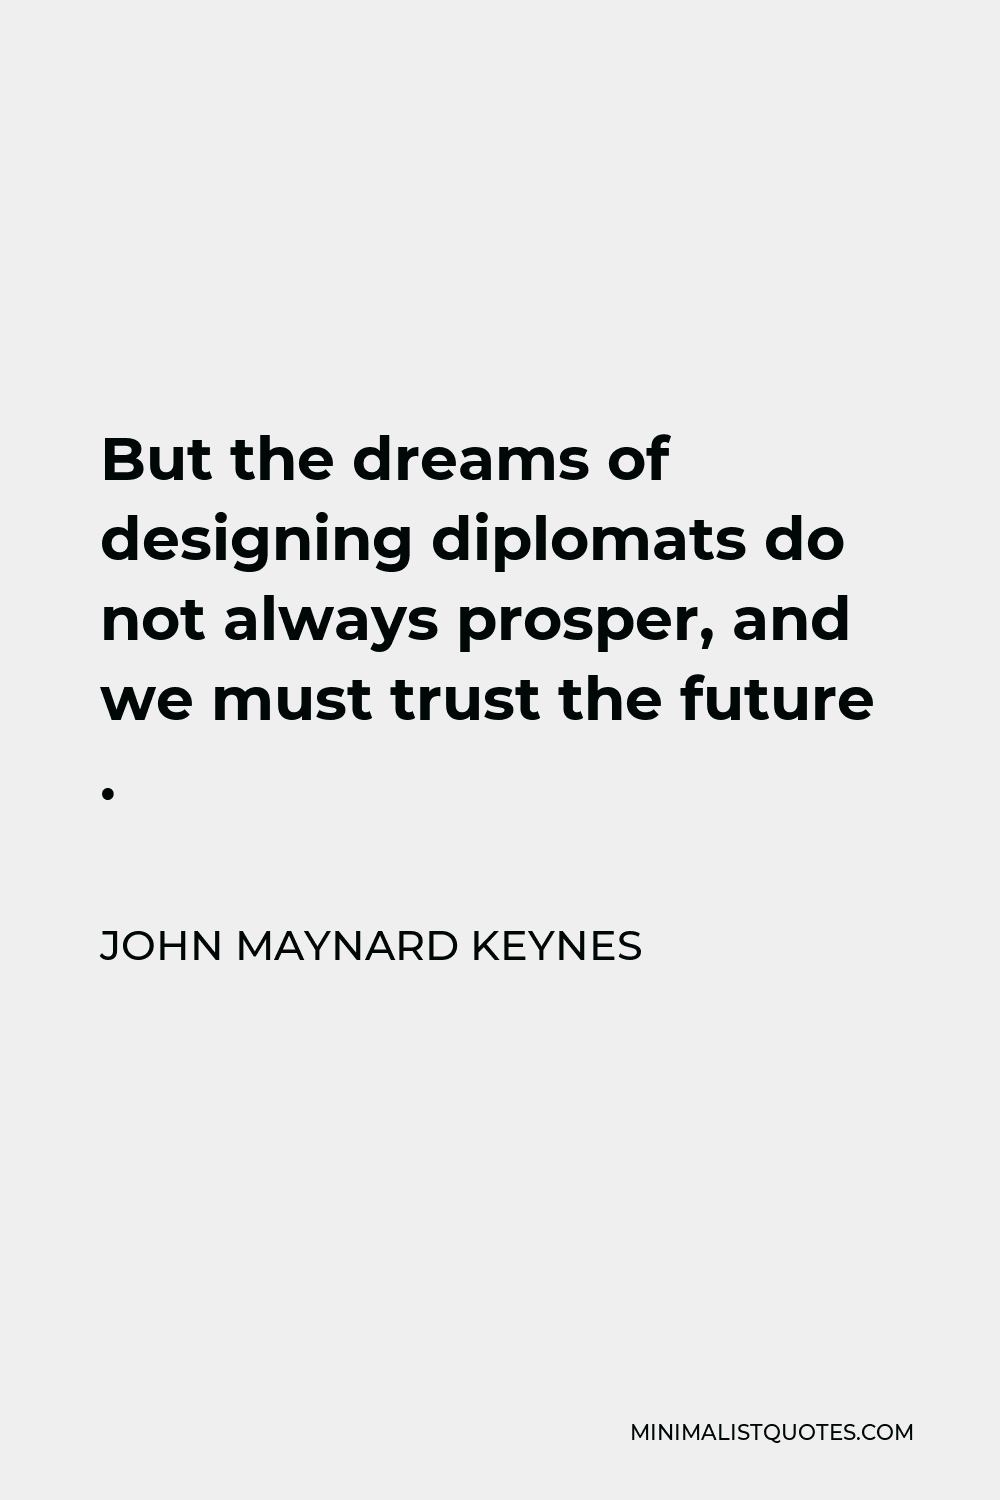 John Maynard Keynes Quote - But the dreams of designing diplomats do not always prosper, and we must trust the future .